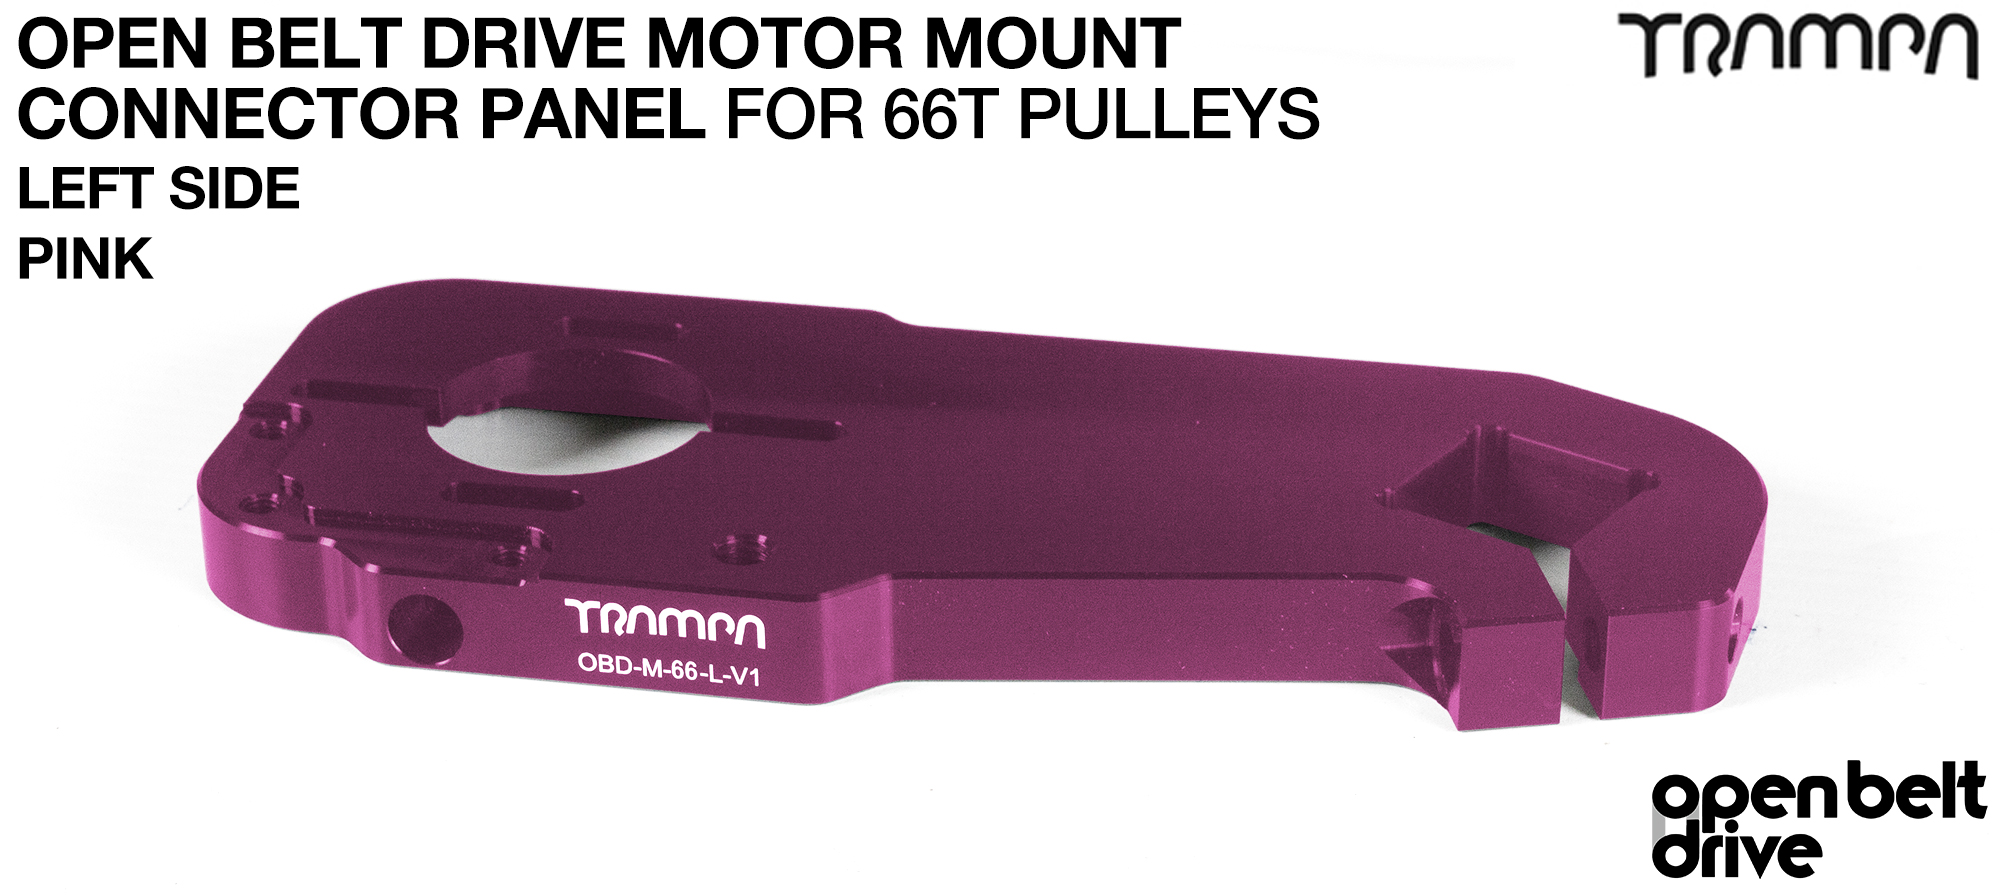 OBD Motor Mount Connector Panel for 66 tooth Pulleys - REGULAR - PINK